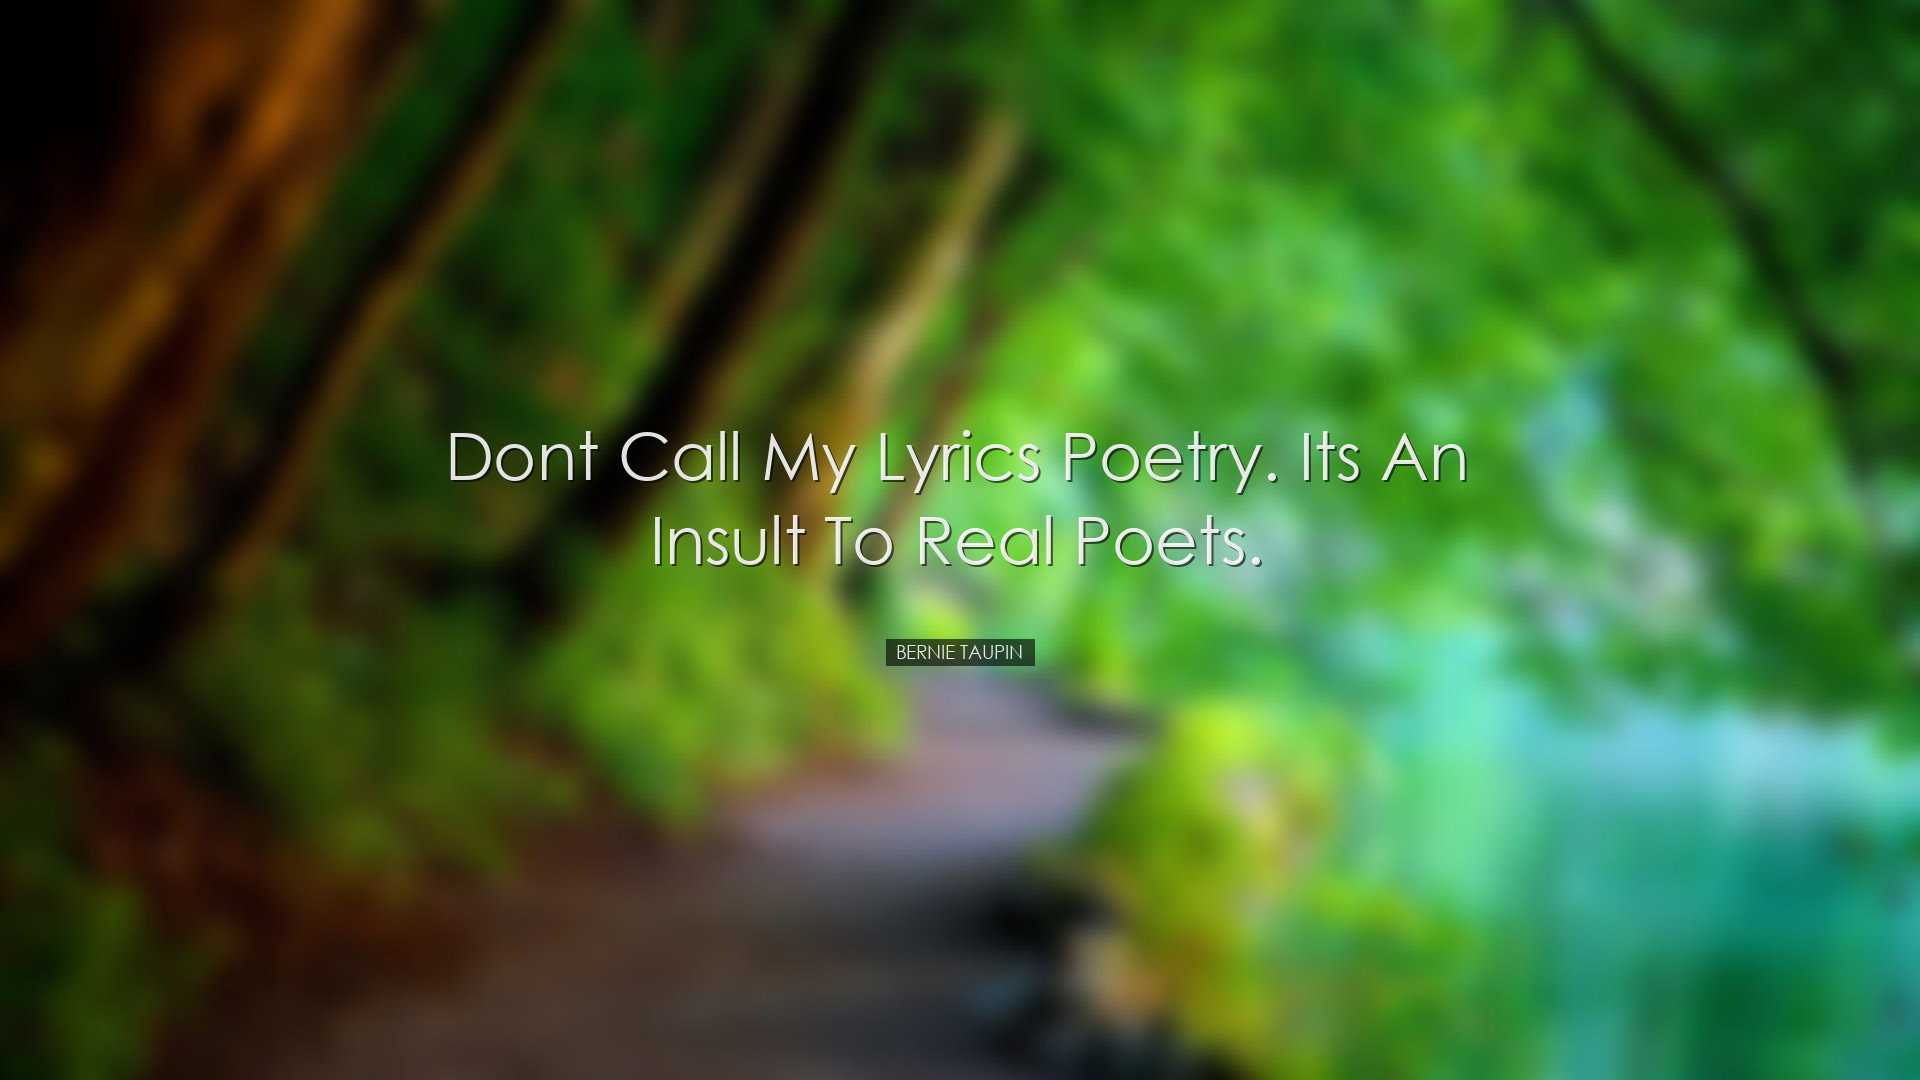 Dont call my lyrics poetry. Its an insult to real poets. - Bernie